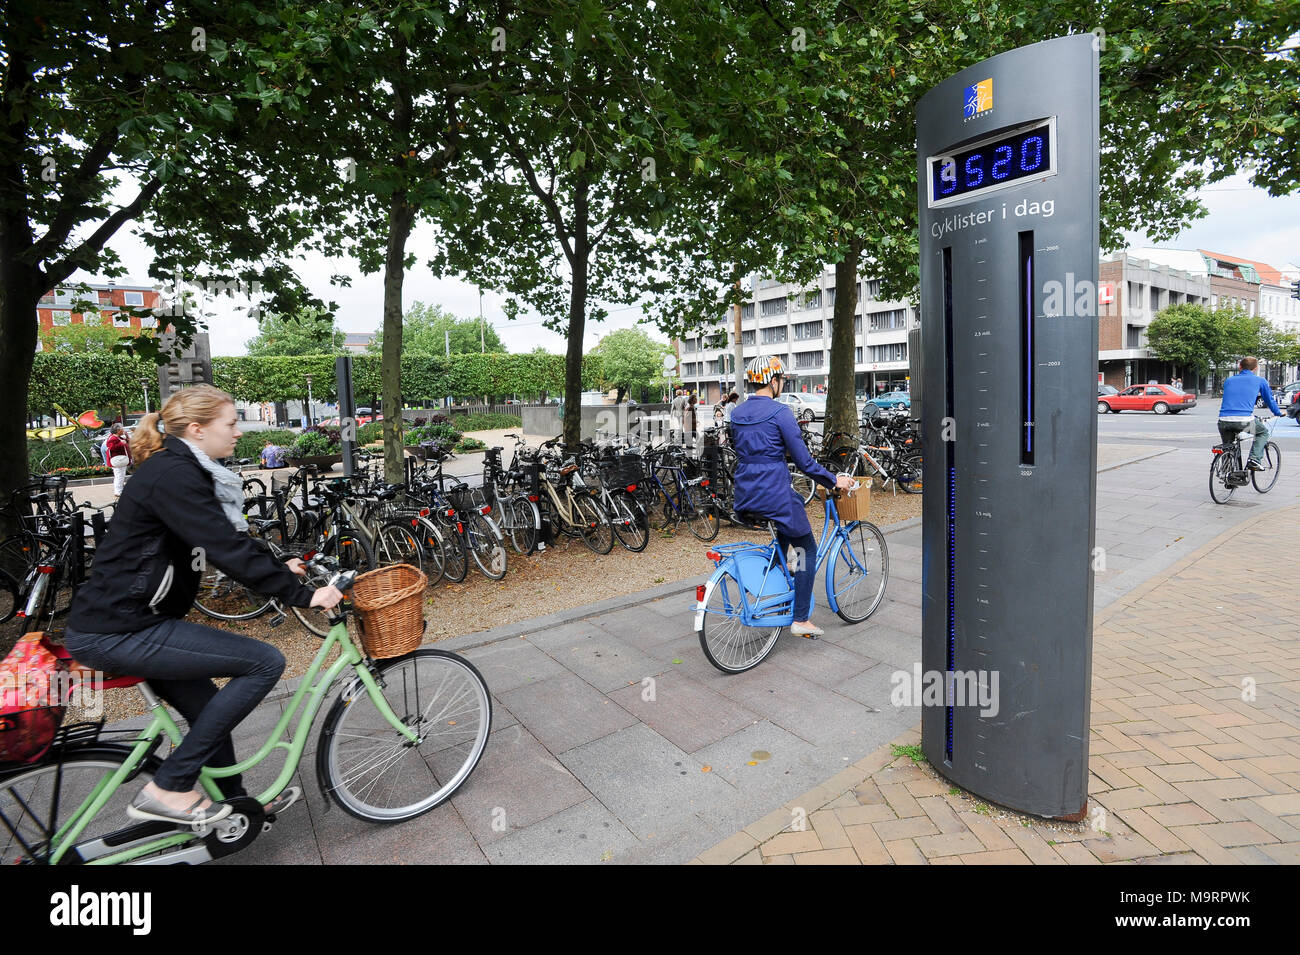 Bicycle counter and bicycle parking in Odense, Denmark. August 21st 2010 © Wojciech Strozyk / Alamy Stock Photo Stock Photo